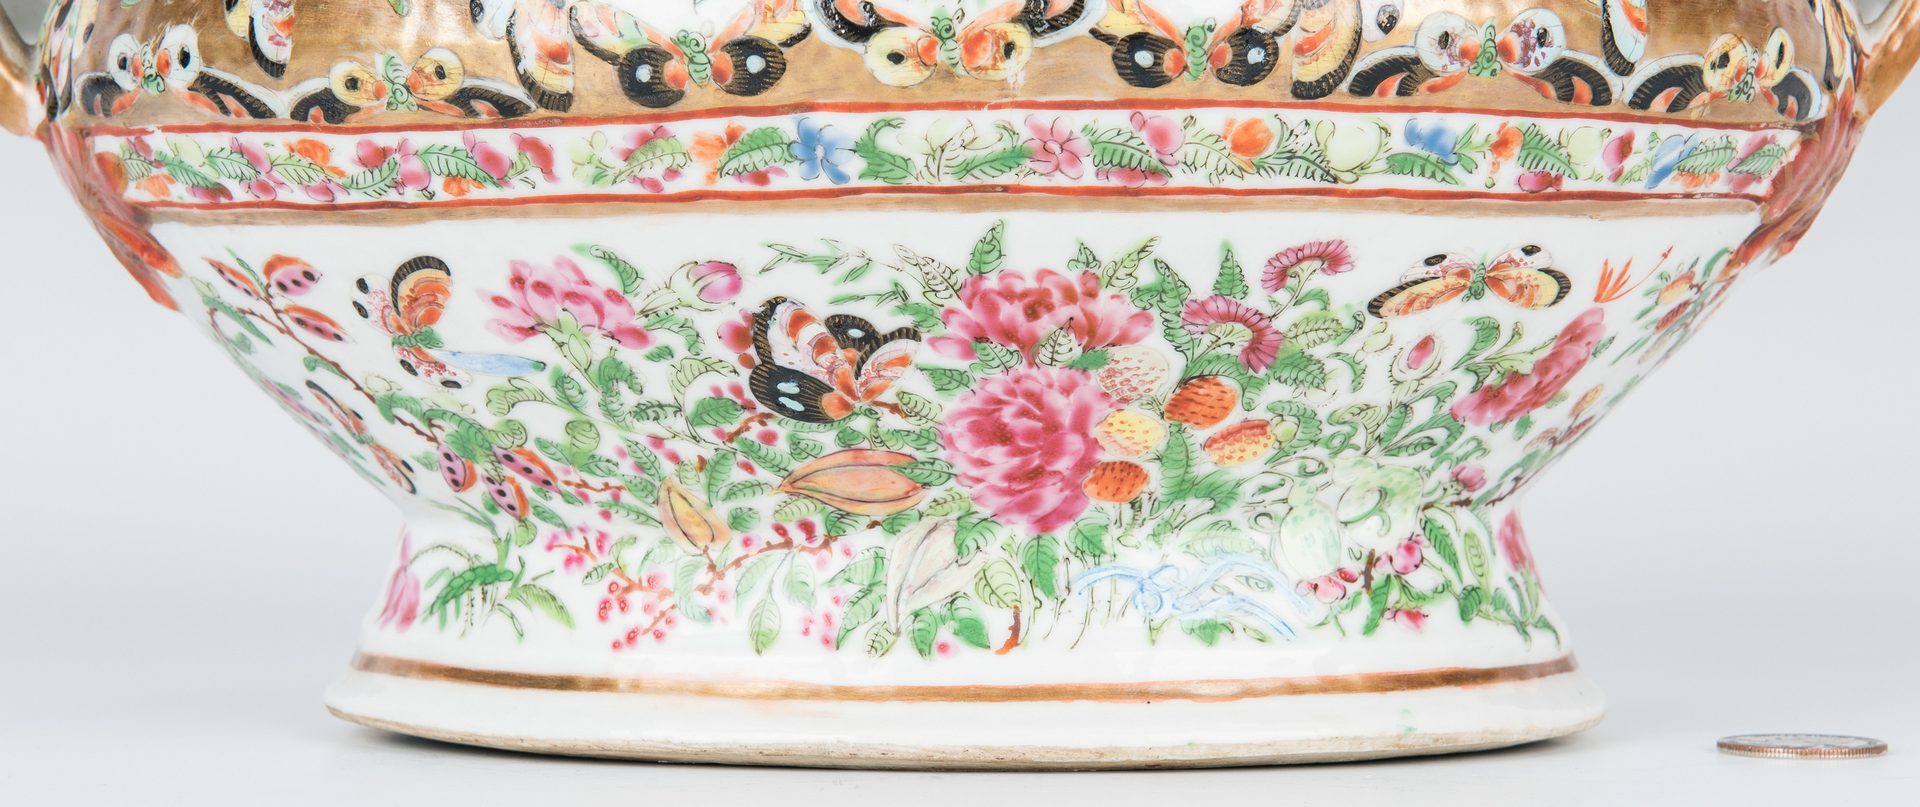 Lot 28: 4 Famille Rose Serving pieces incl. Tureen